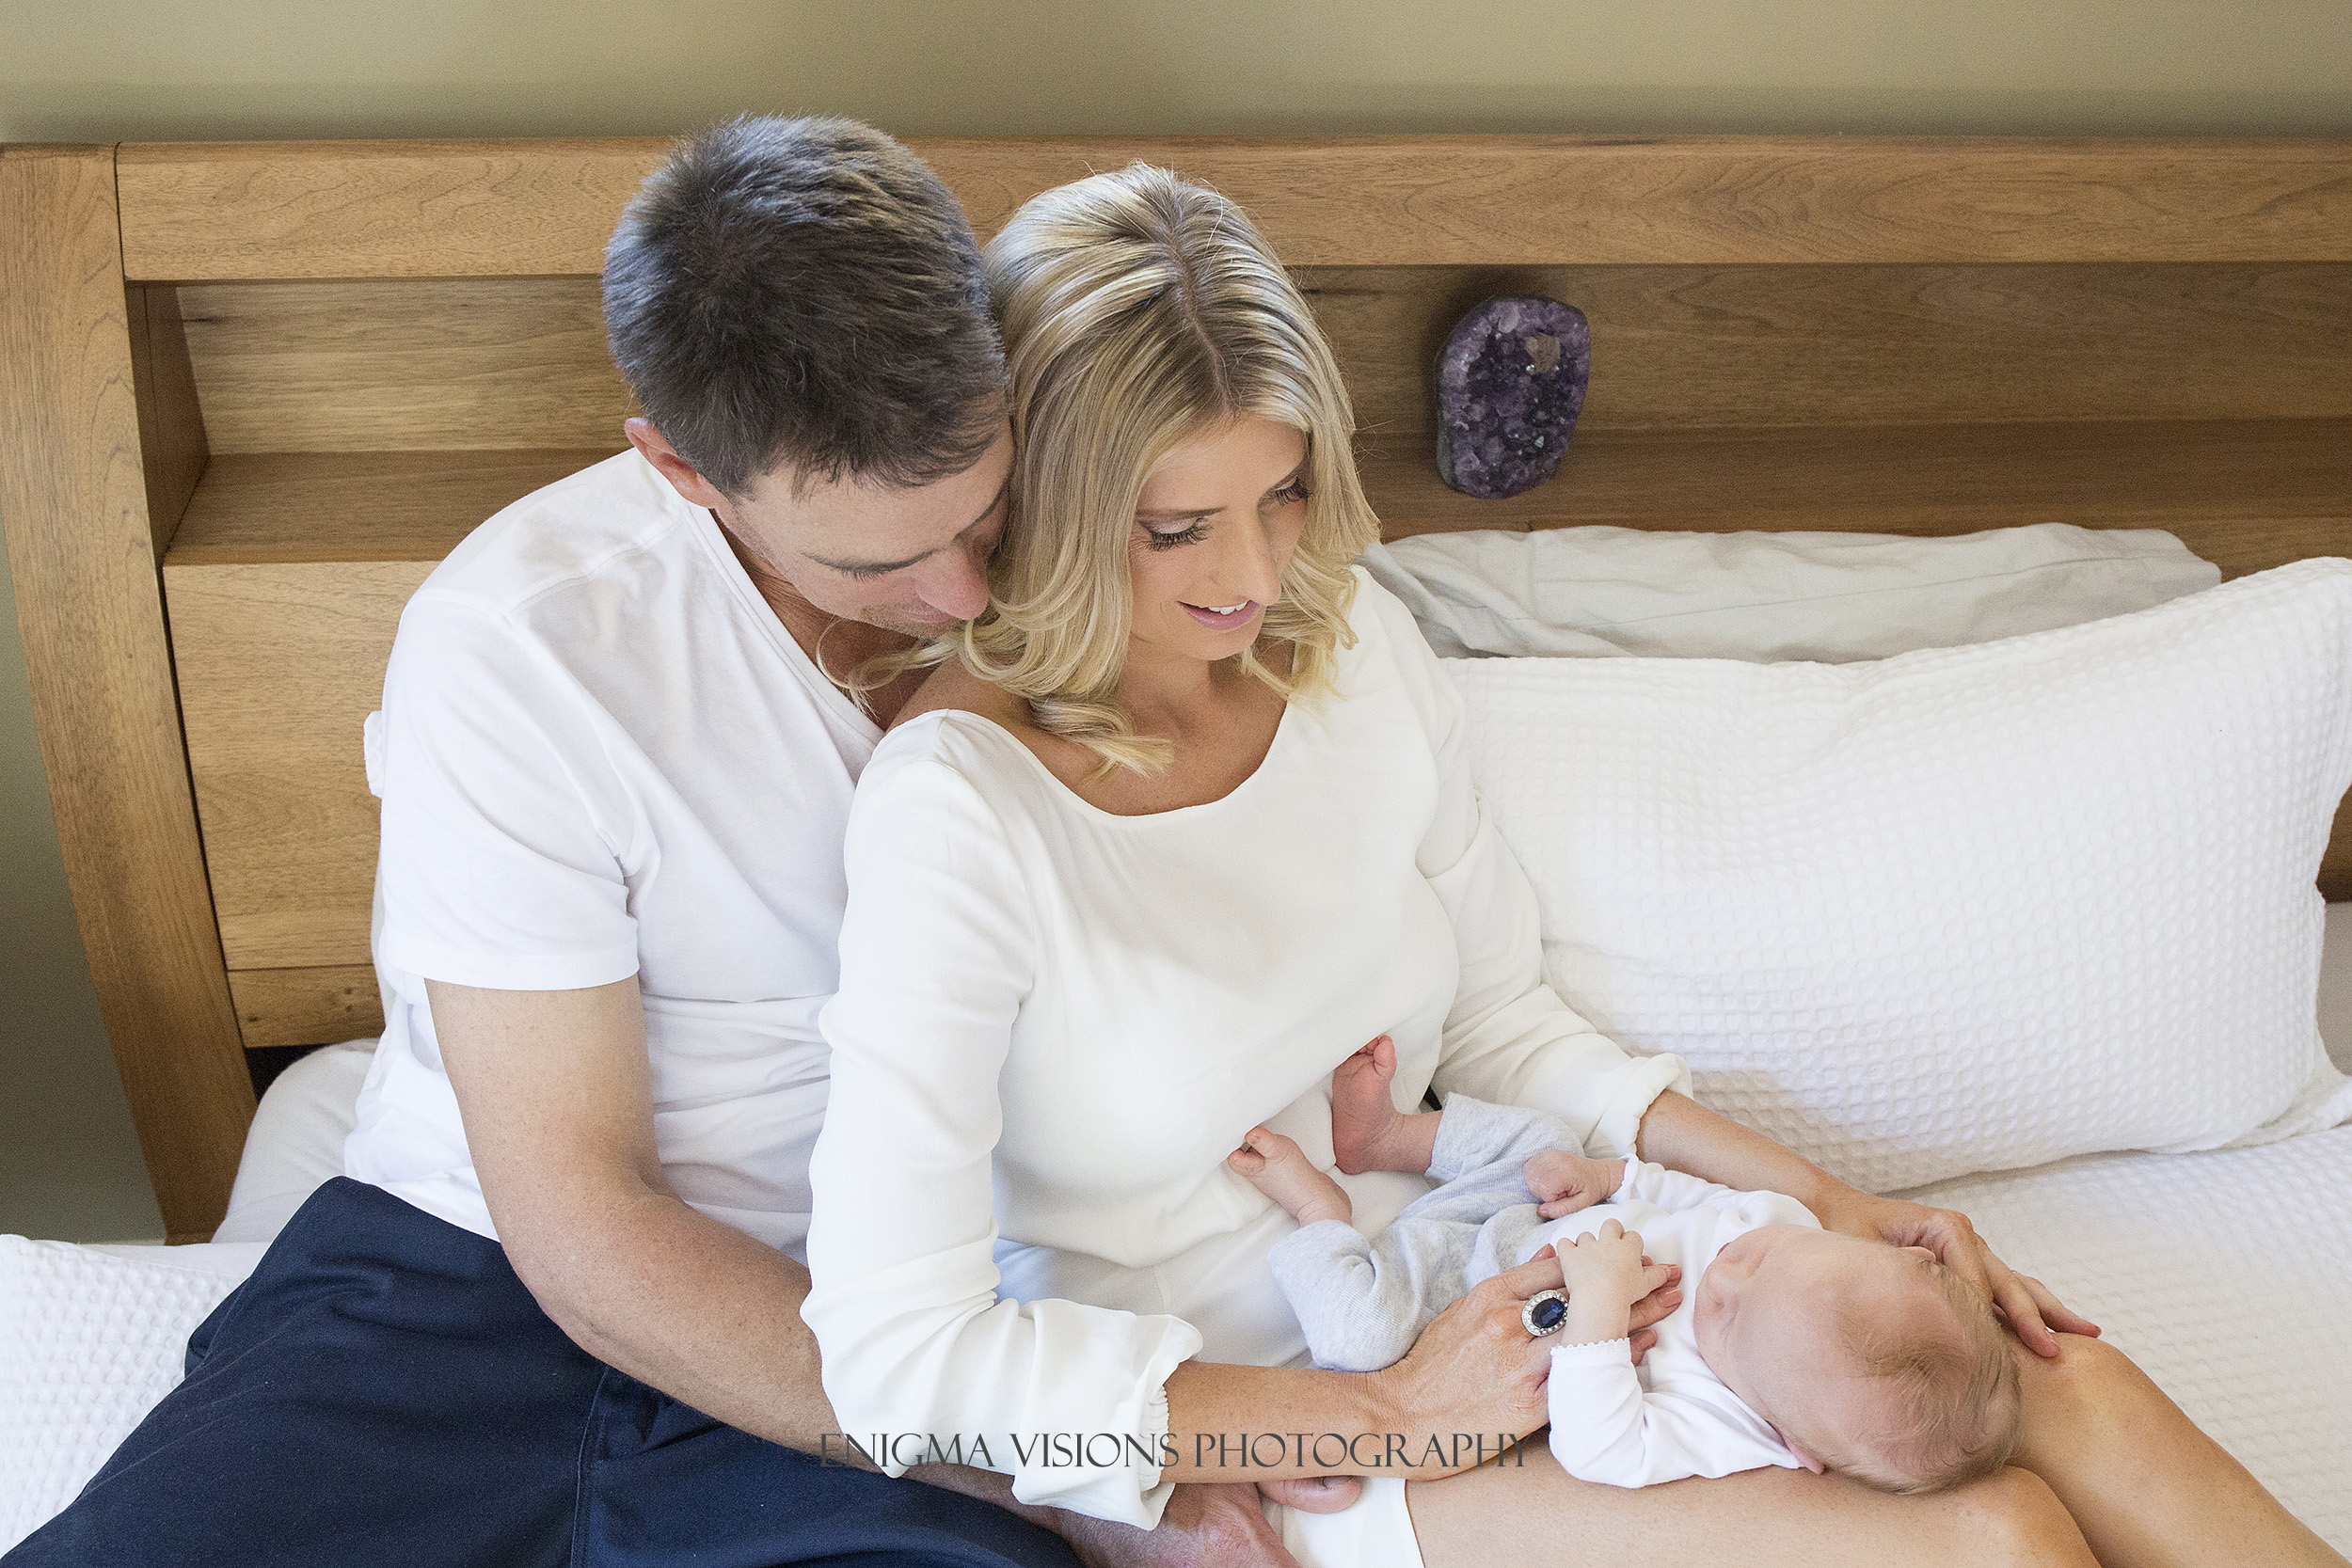 enigma_visions_photography_newborn_lifestyle_lux (28) copy.jpg